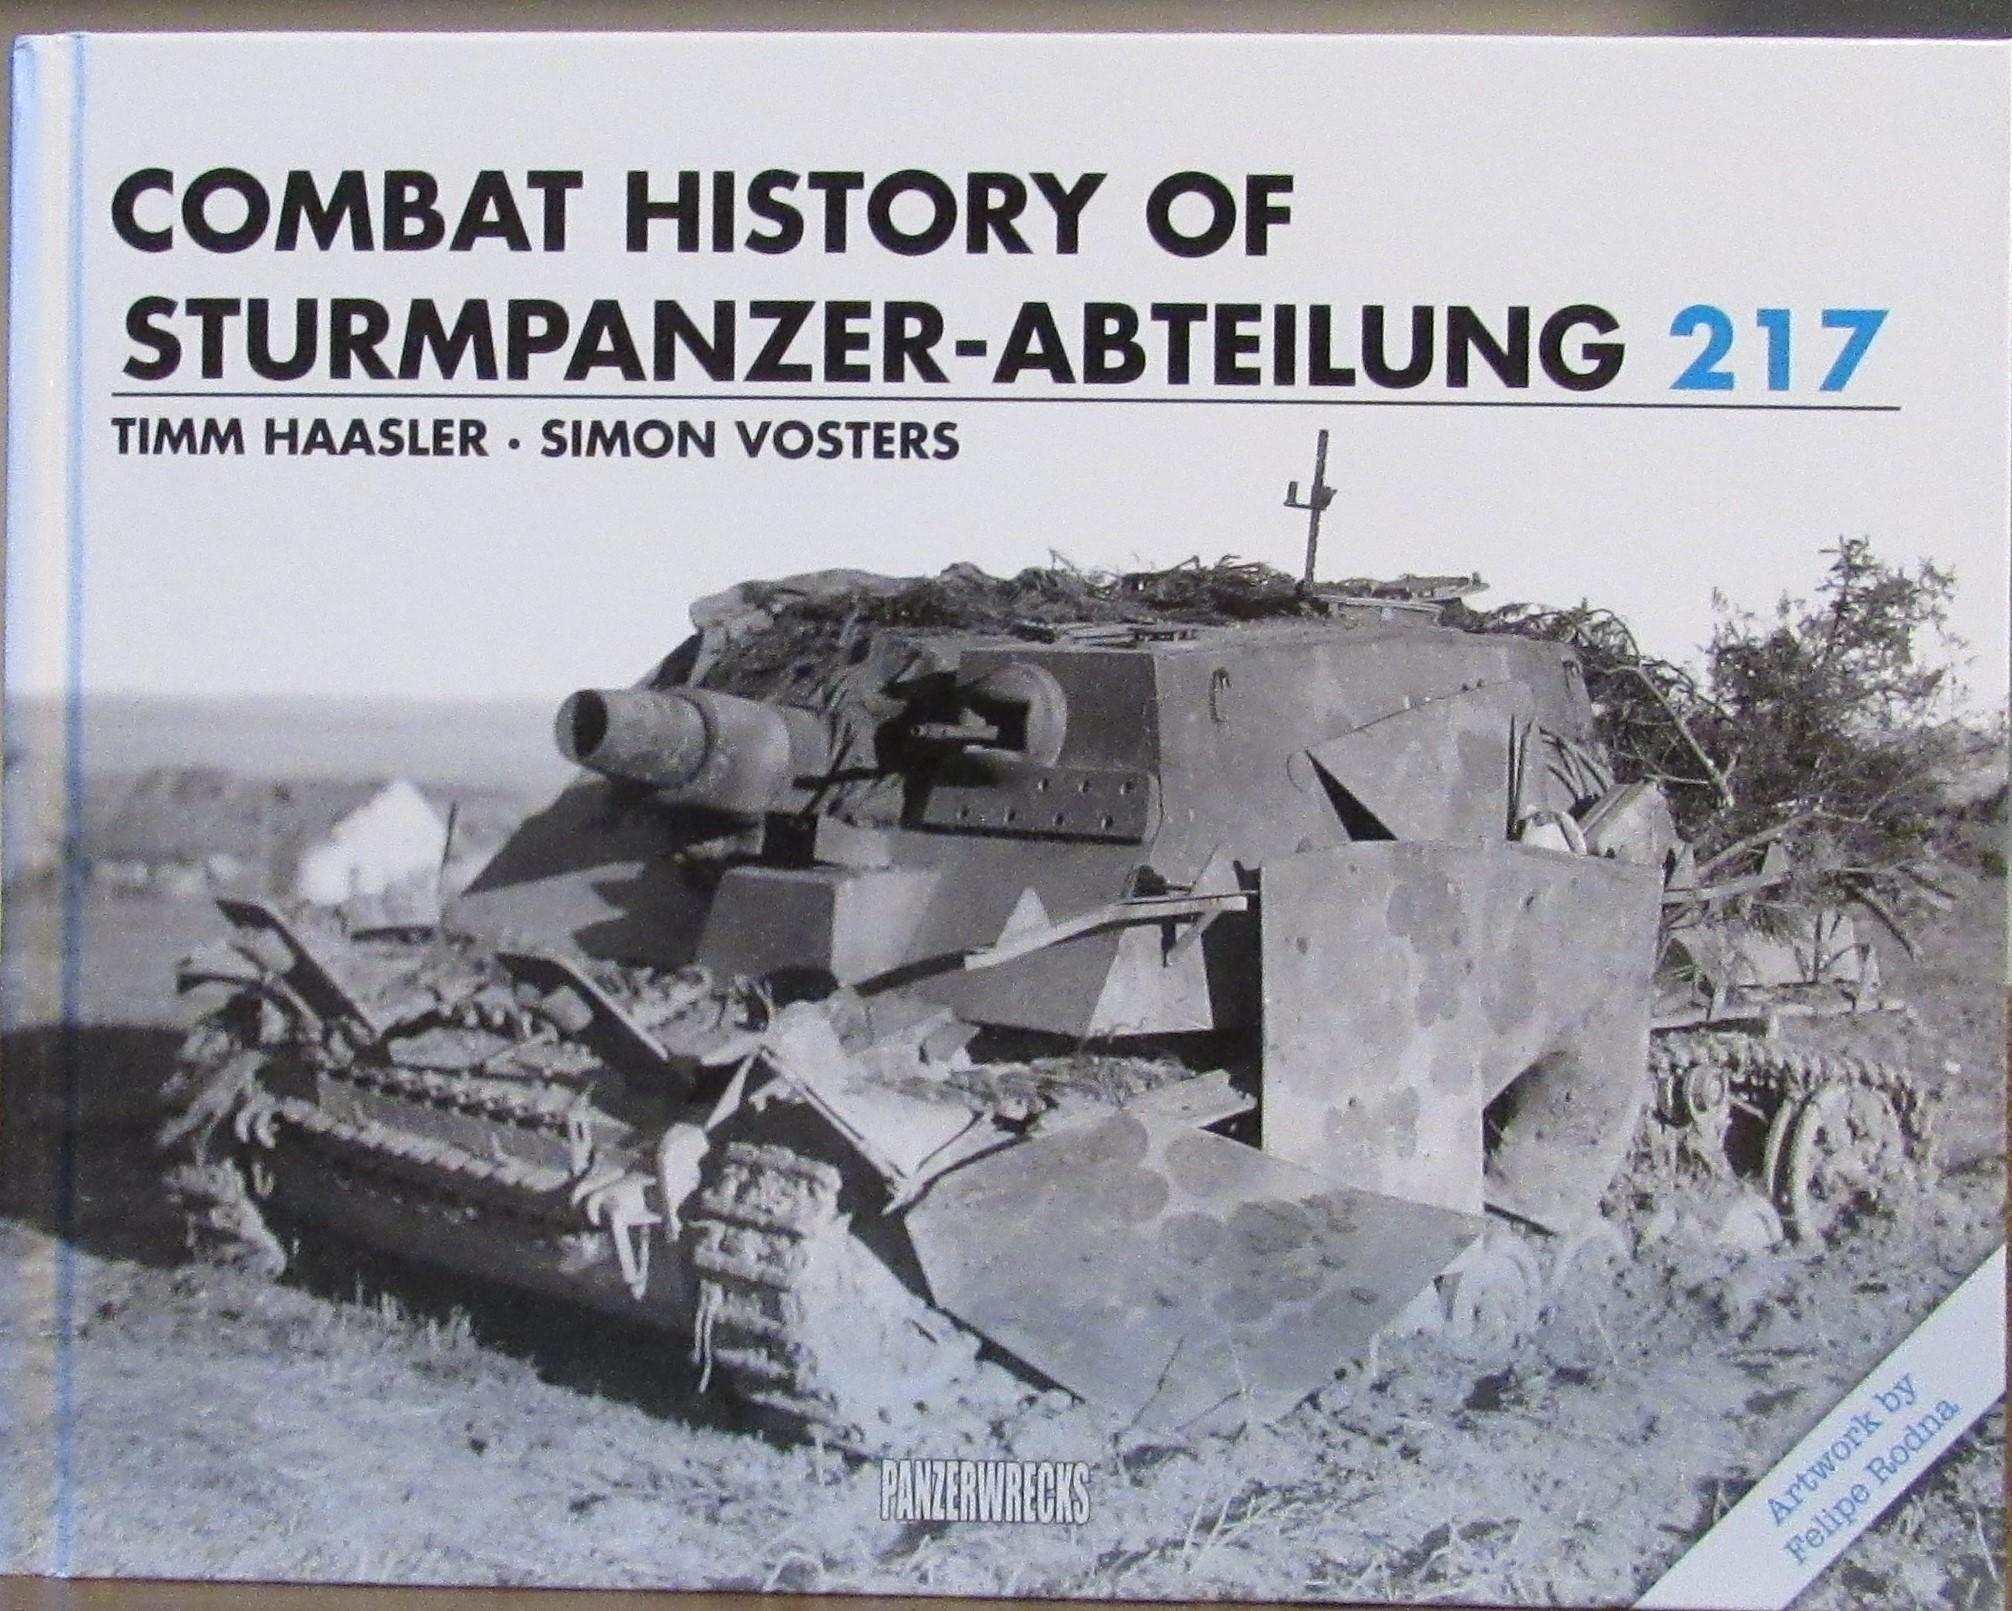 Combat History of Sturmpanzer - Abteilung 217 by Haasler, Timm and ...